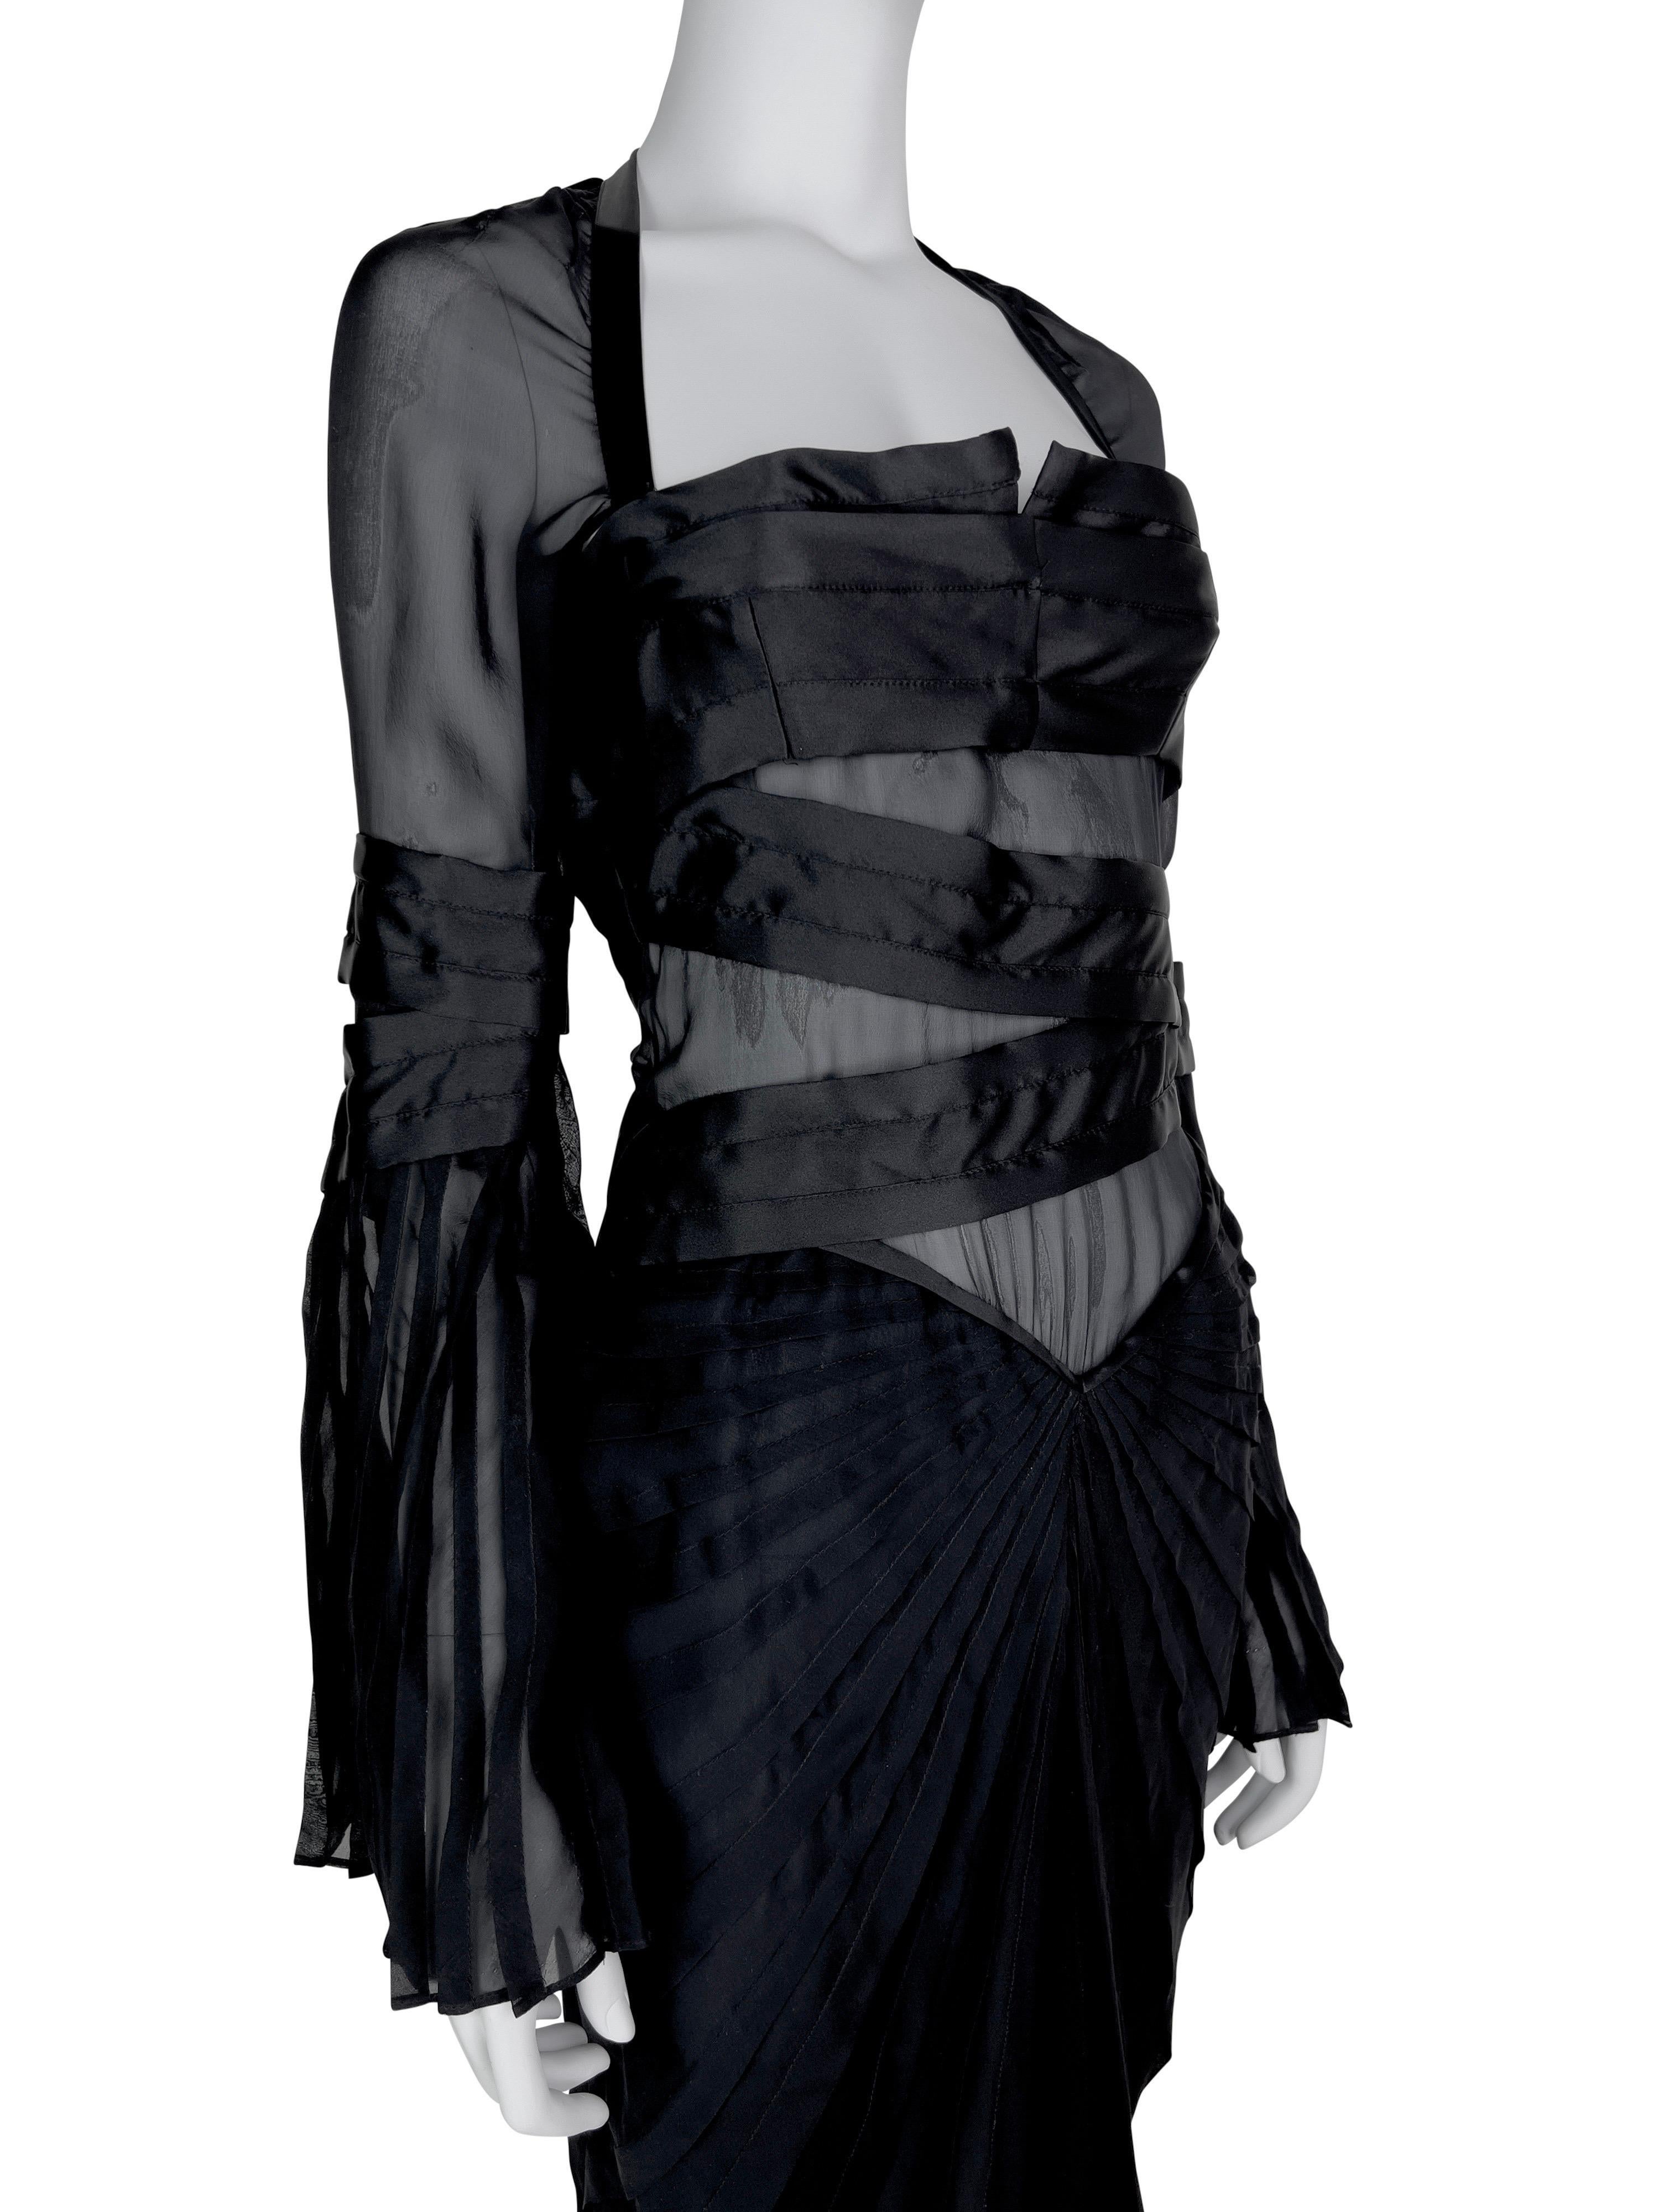 Gucci by Tom Ford Fall 2004 Pleated Bondage Silk Dress For Sale 7